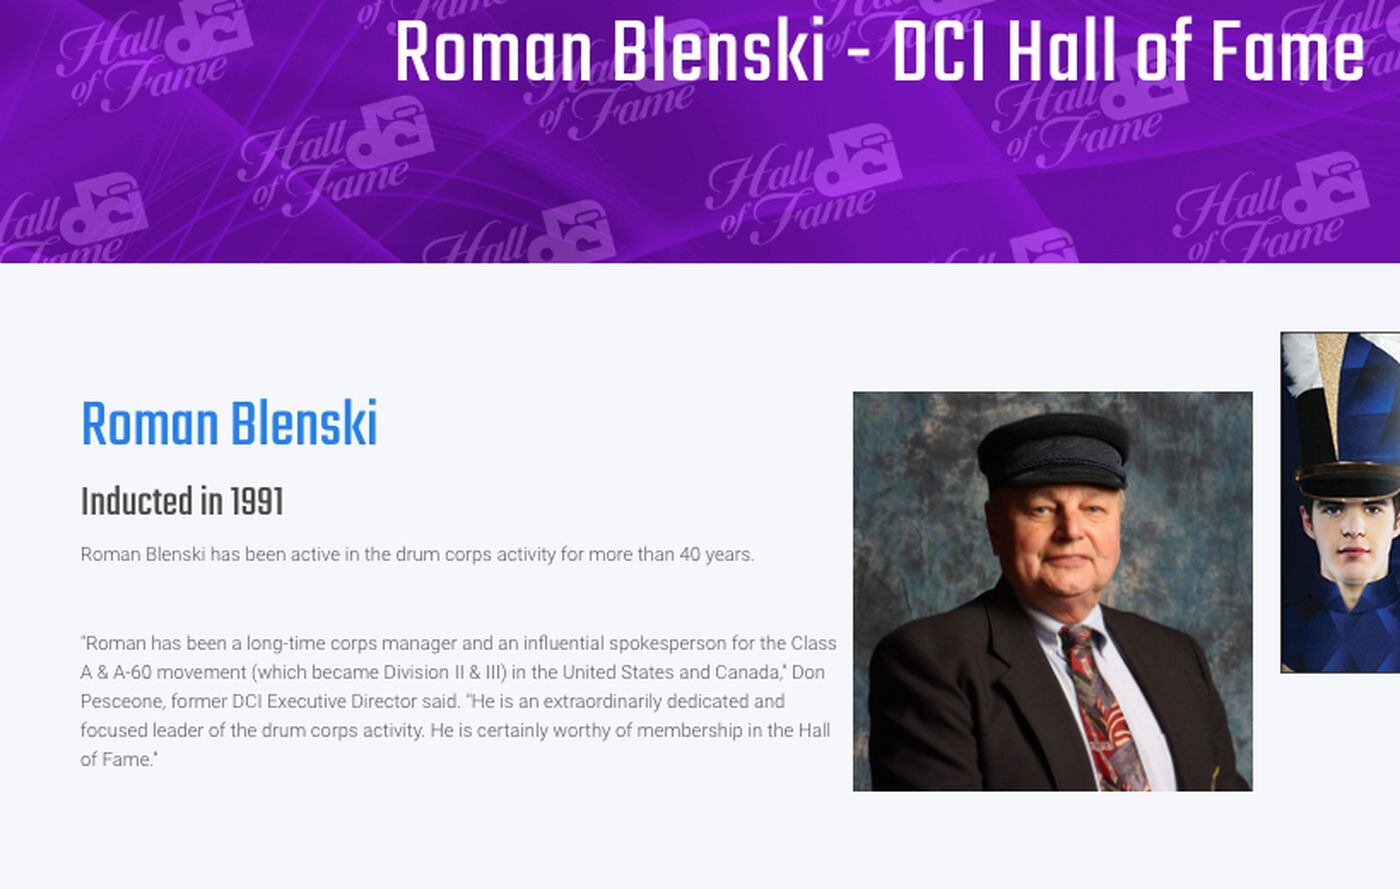 Pioneer Drum and Bugle Corps director Roman Blenski is a member of the Drum Corps International Hall of Fame.